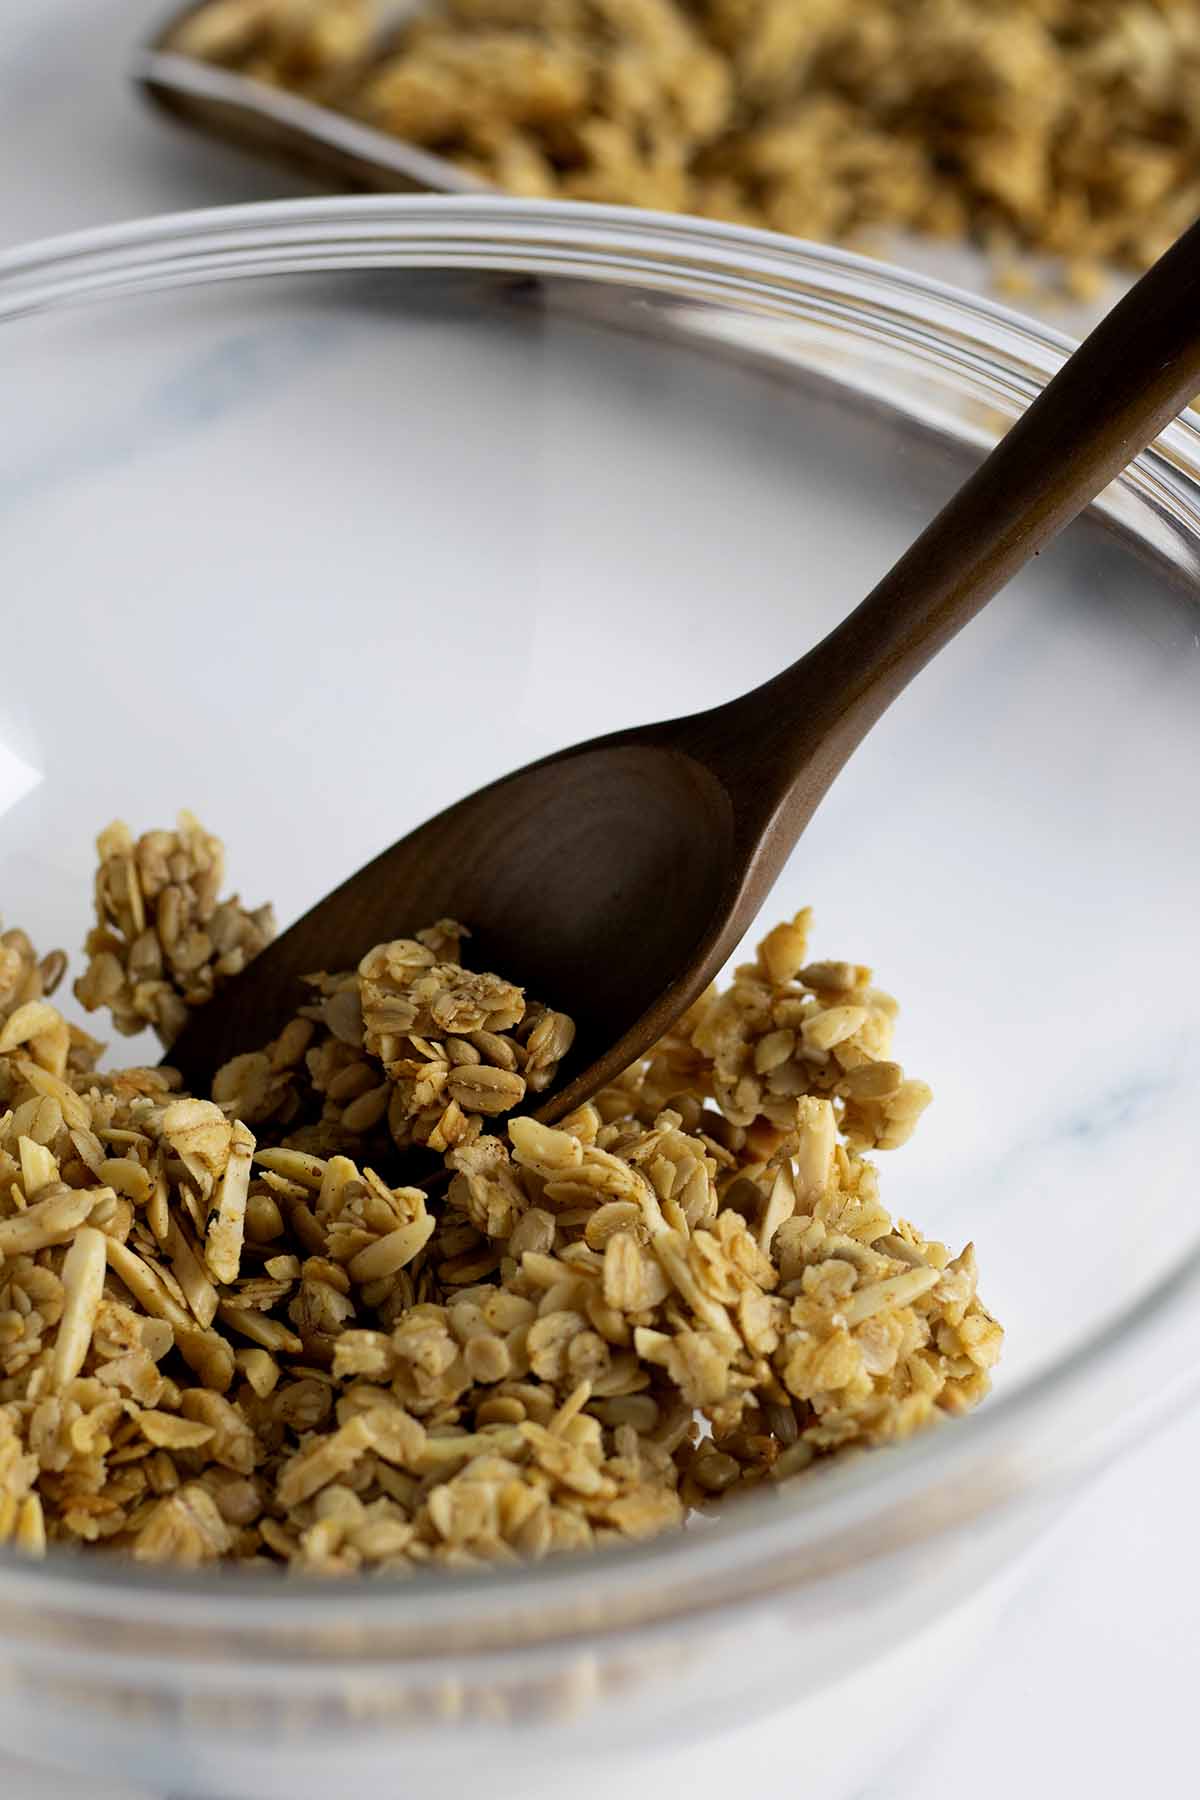 Granola clusters in a glass bowl with a wooden spoon